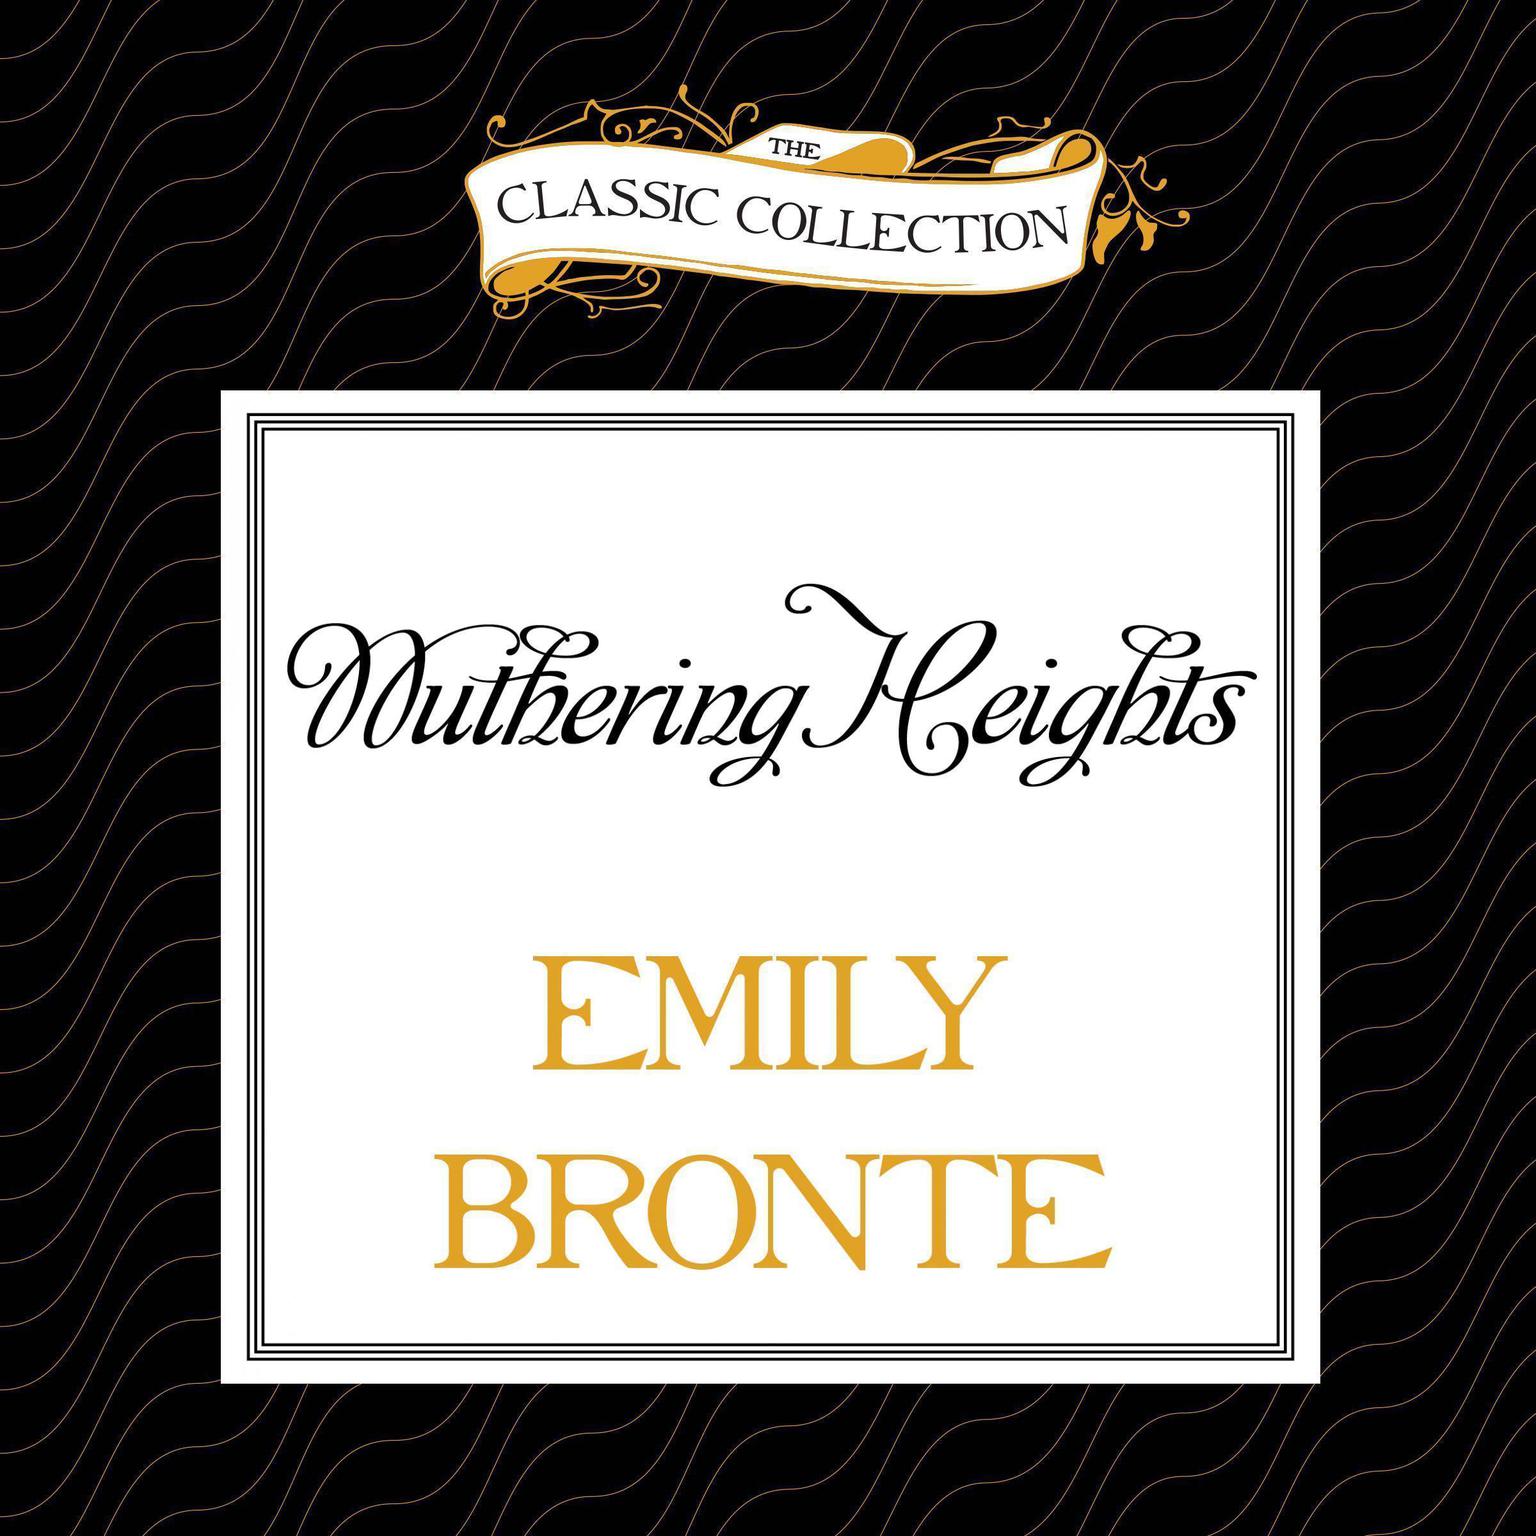 Wuthering Heights Audiobook, by Emily Brontë